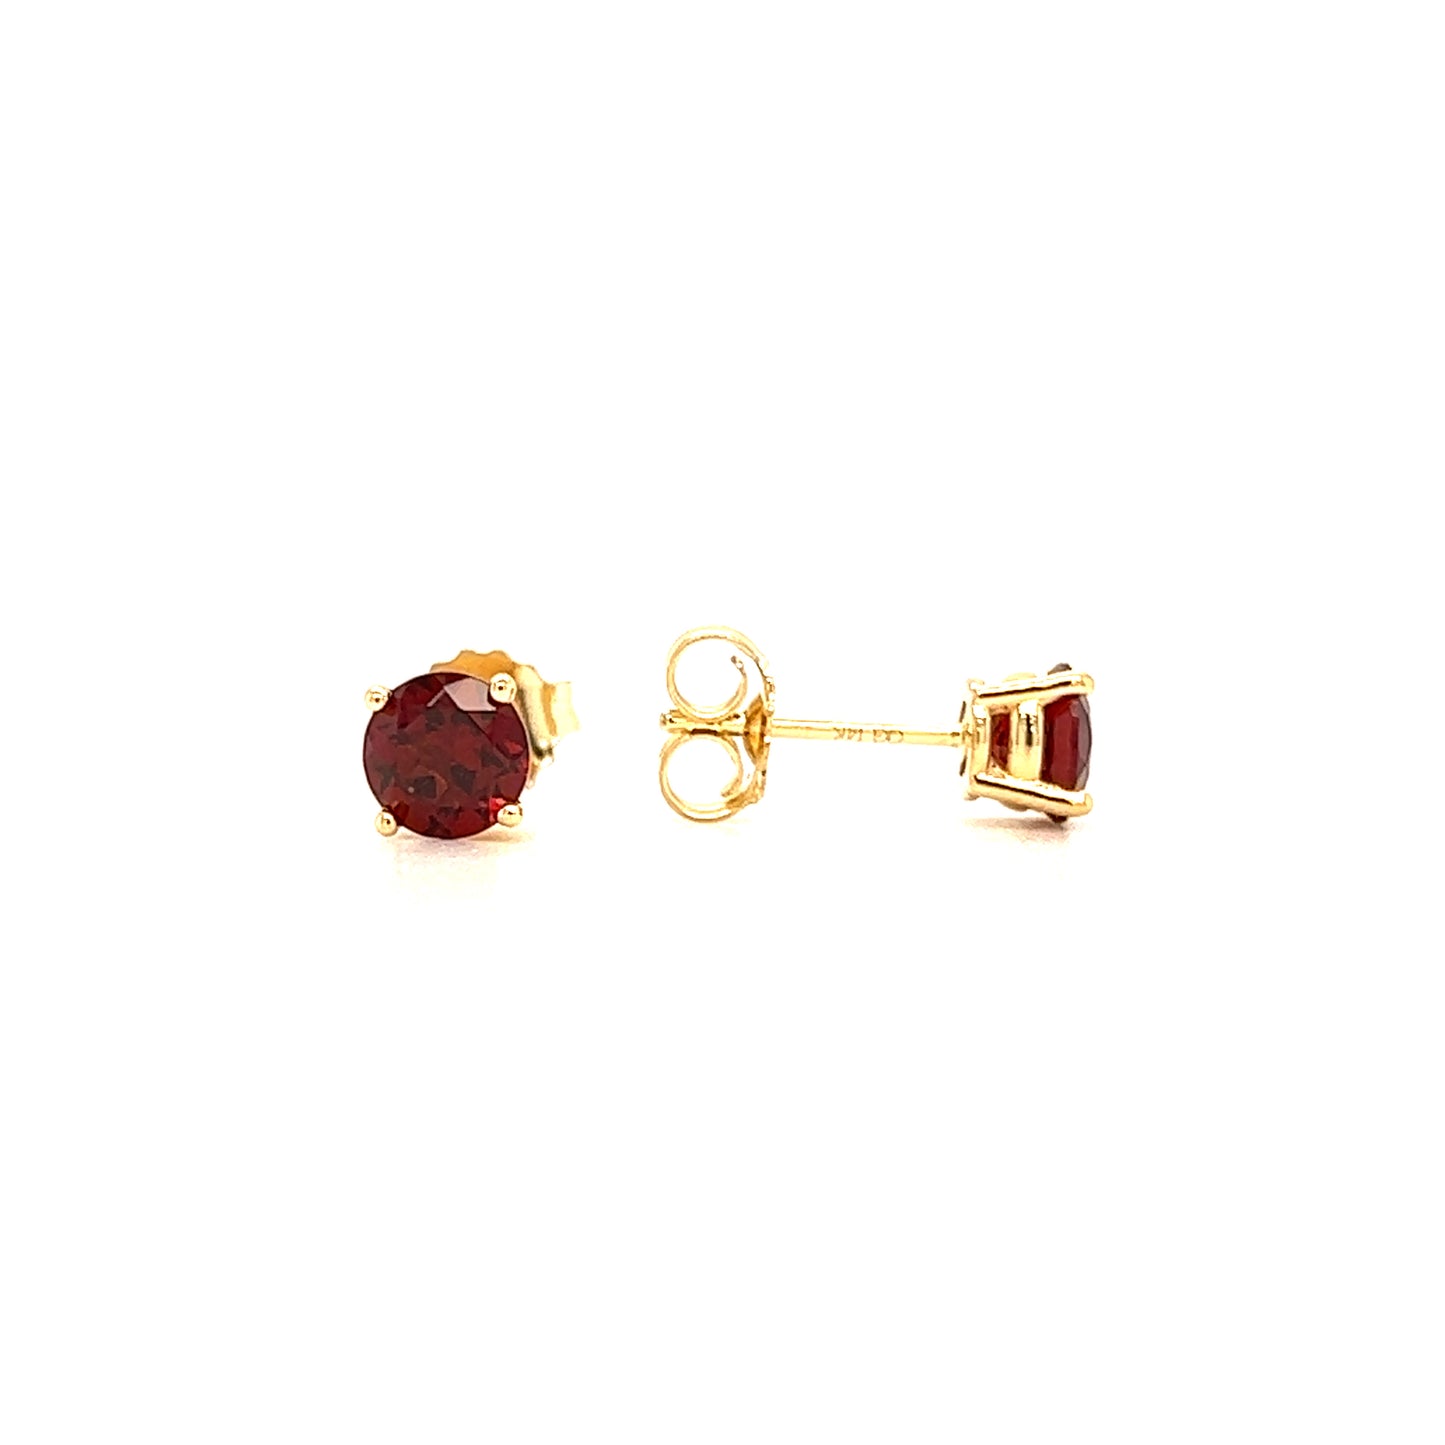 Round Garnet 5mm Stud Earrings in 14K Yellow Gold Front and Side View